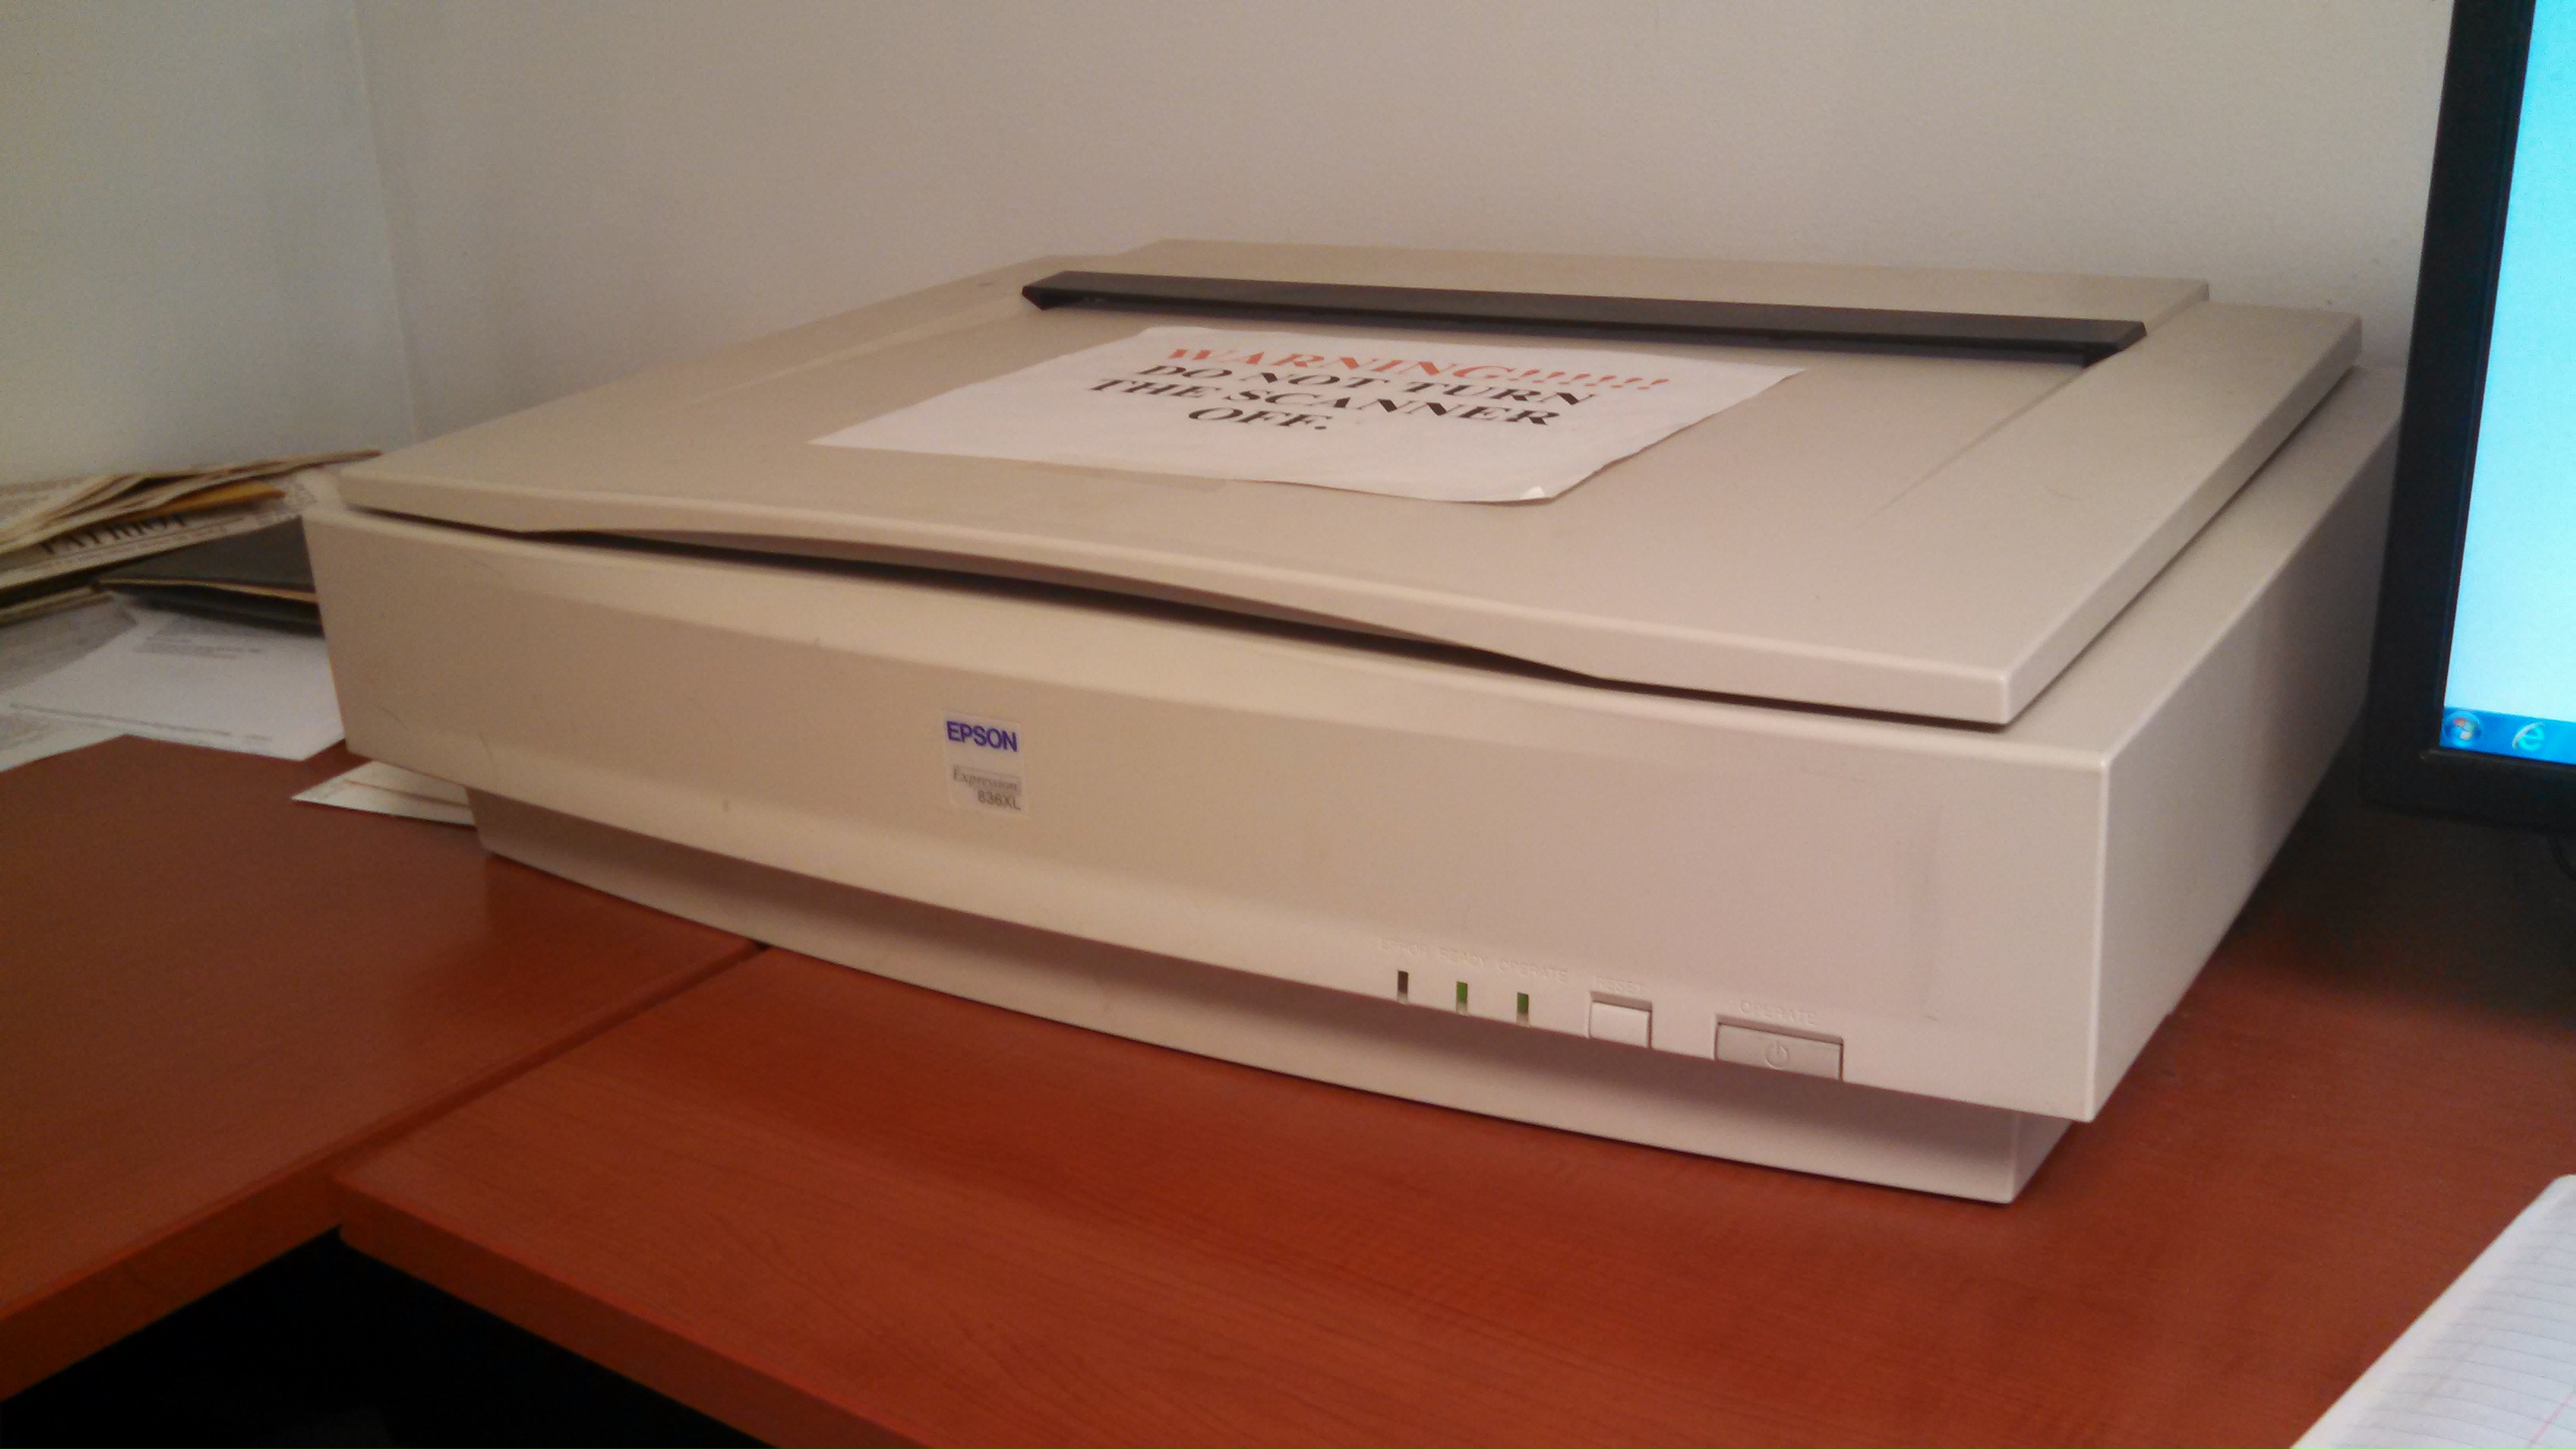 My lovely office assistant- an Epson scanner from the early 1990s